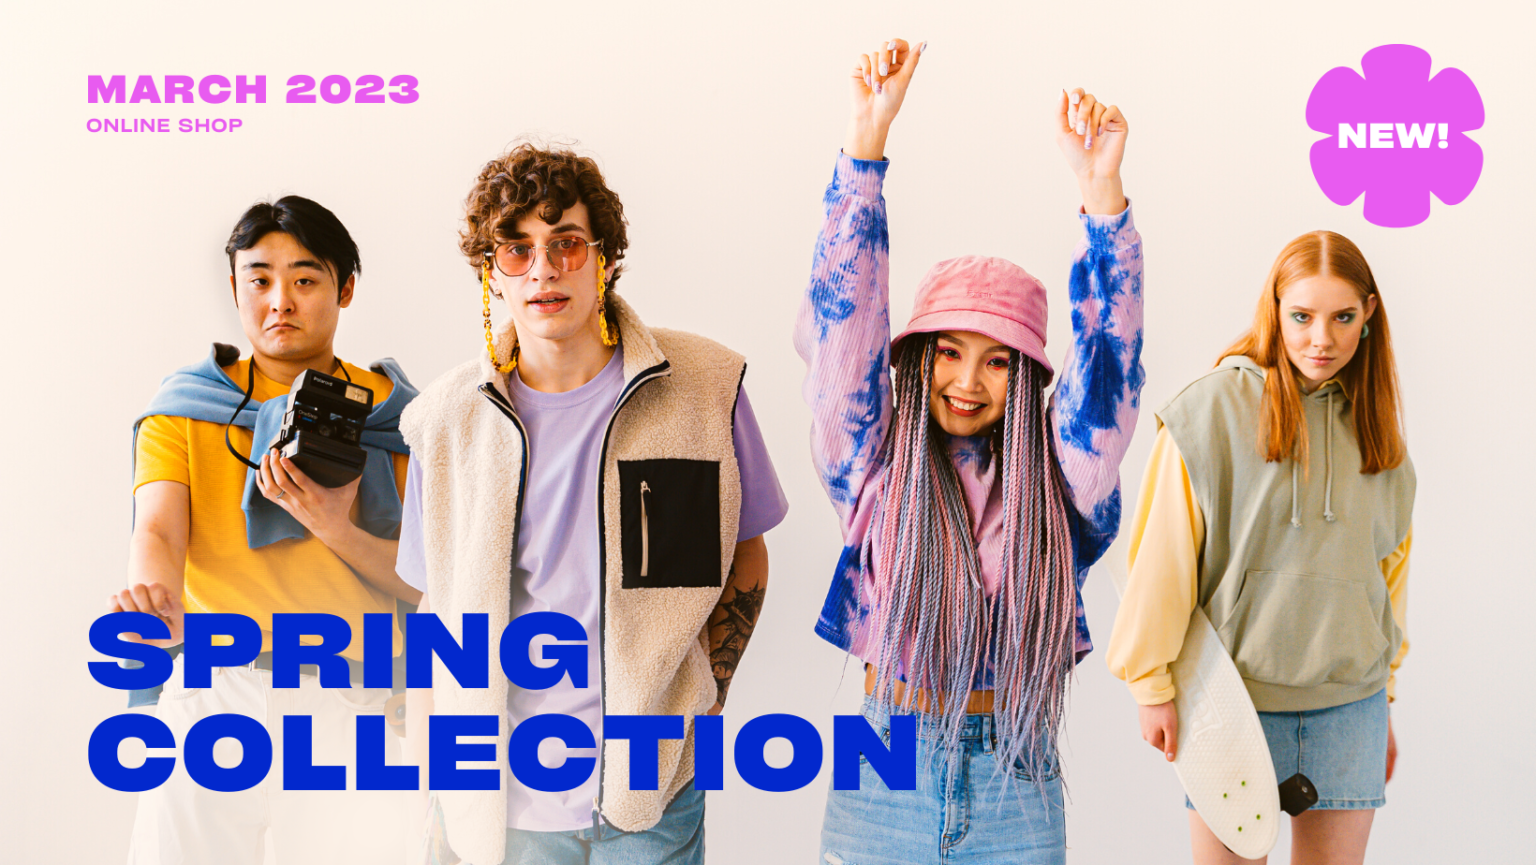 Spring Collection Fashion Store Facebook Cover